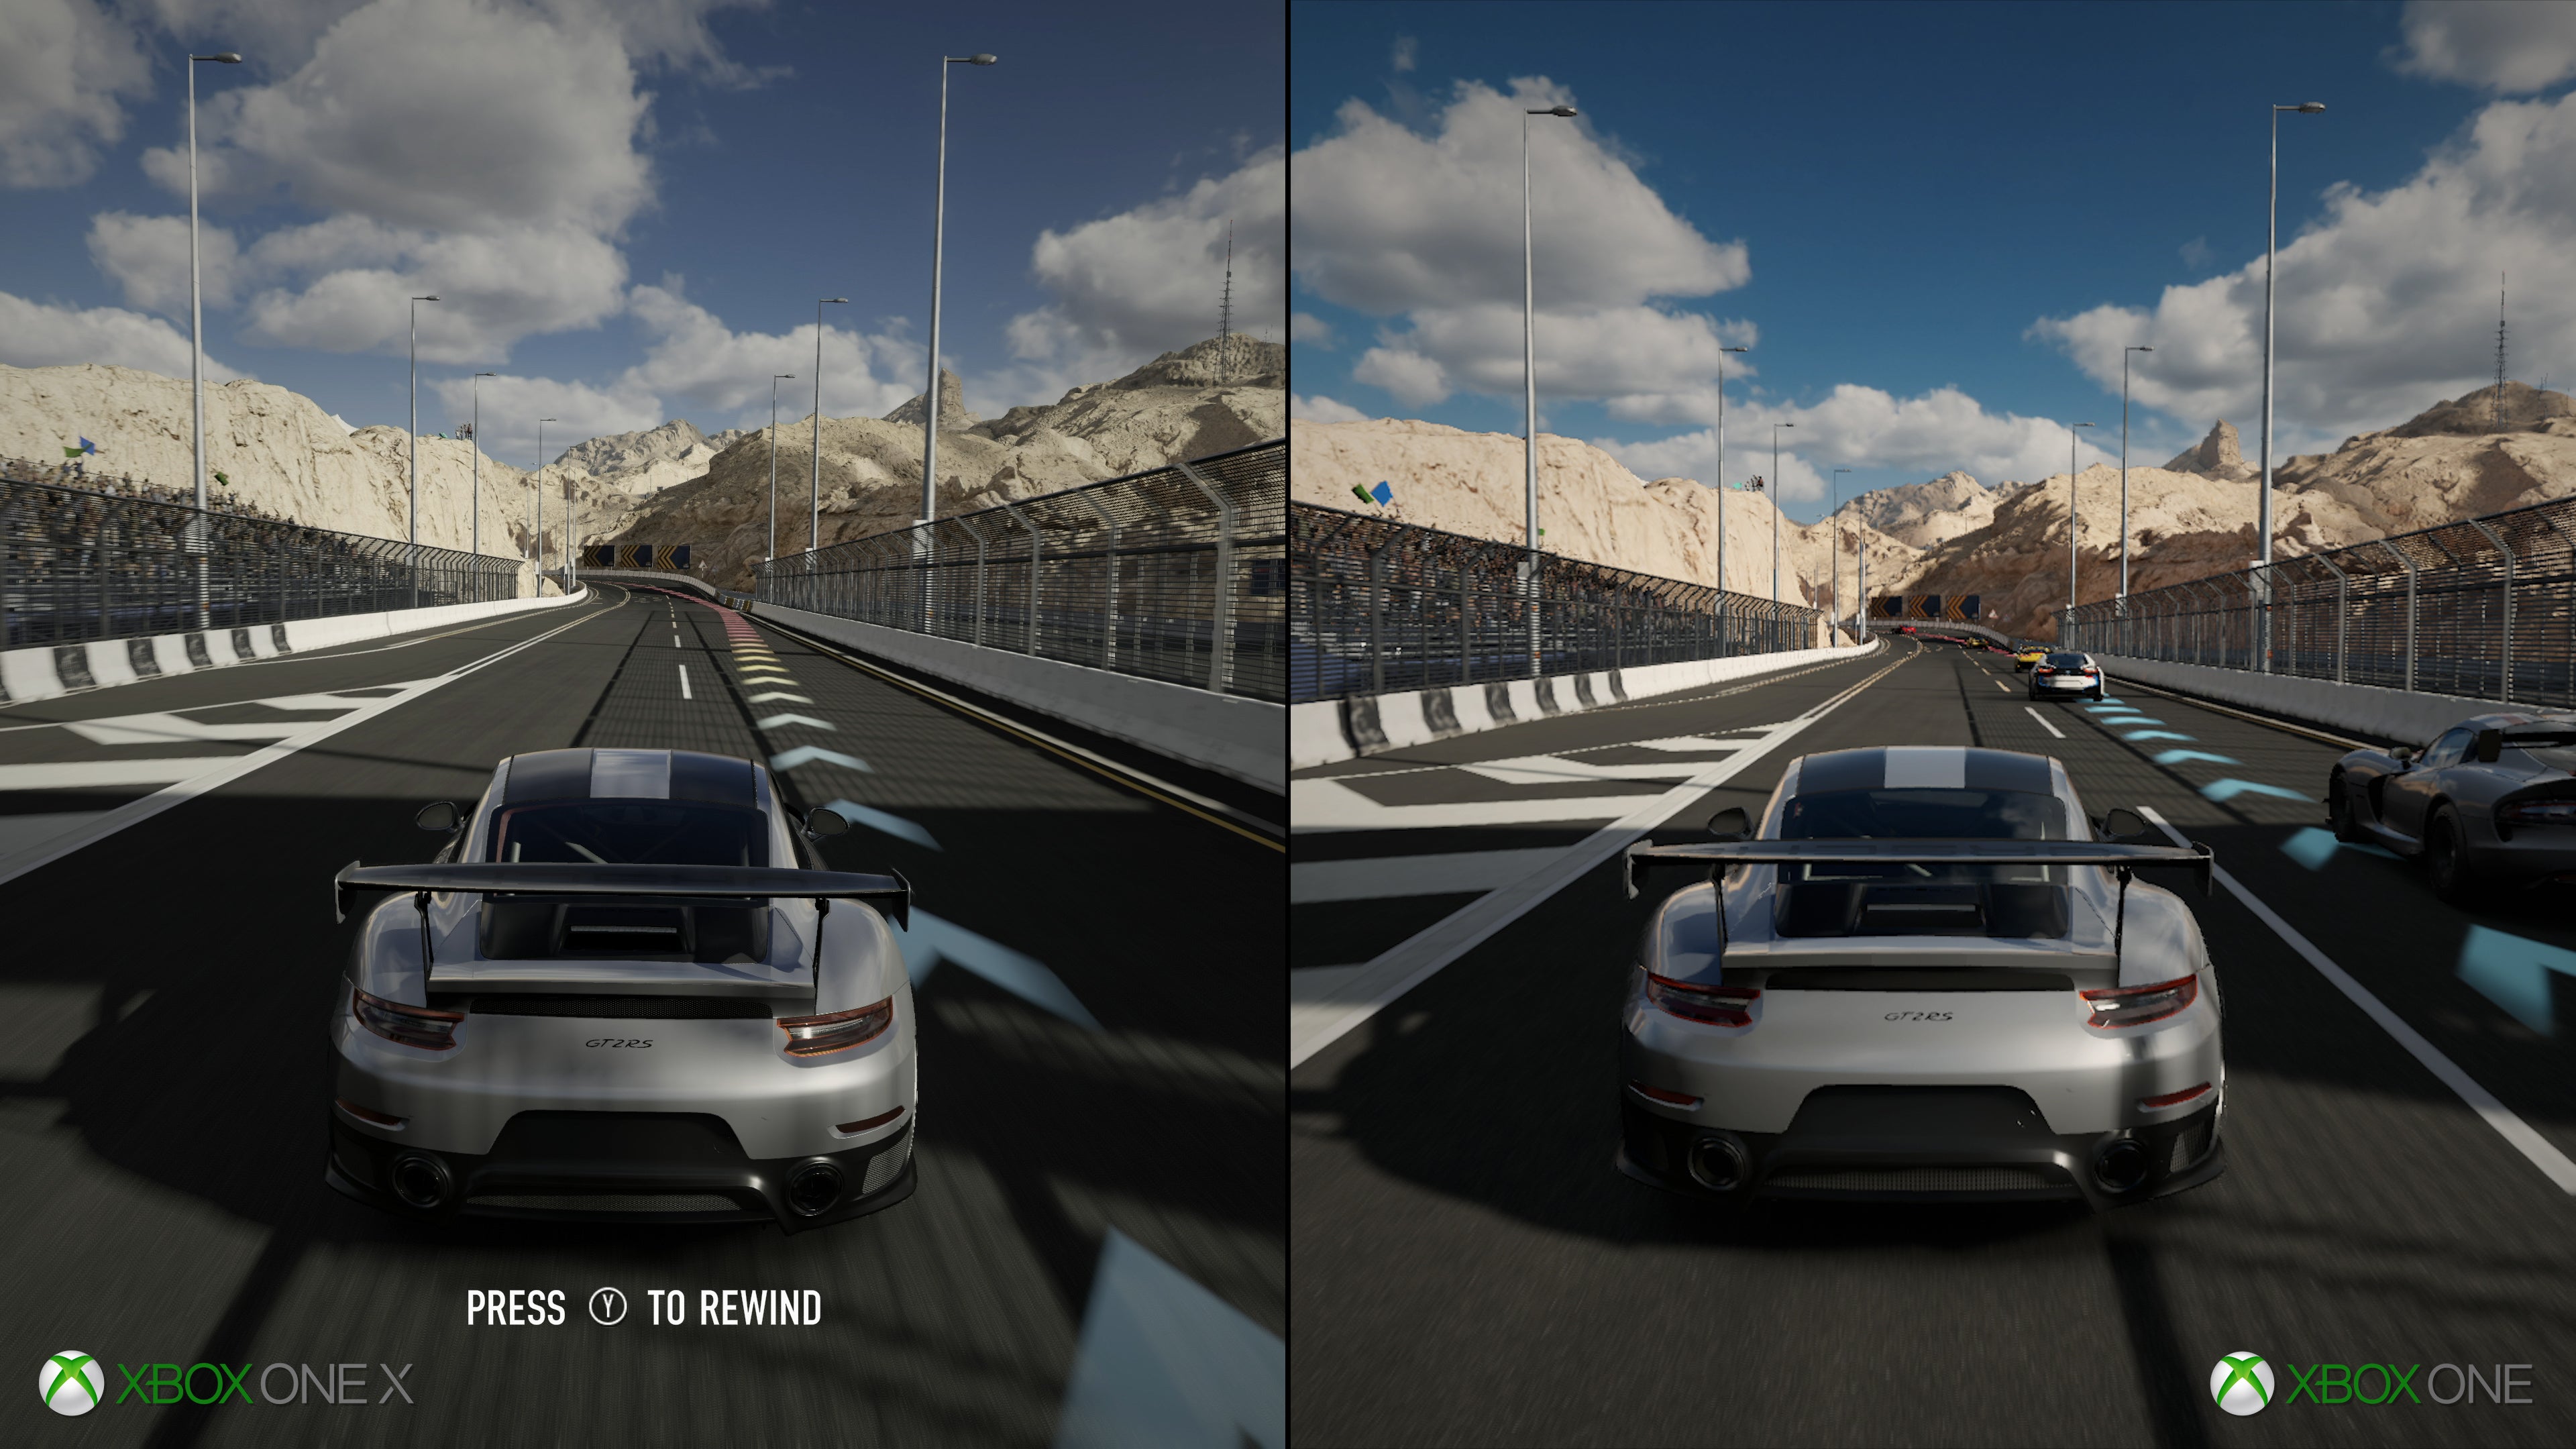 How does Forza 7 improve on Xbox One X over base hardware